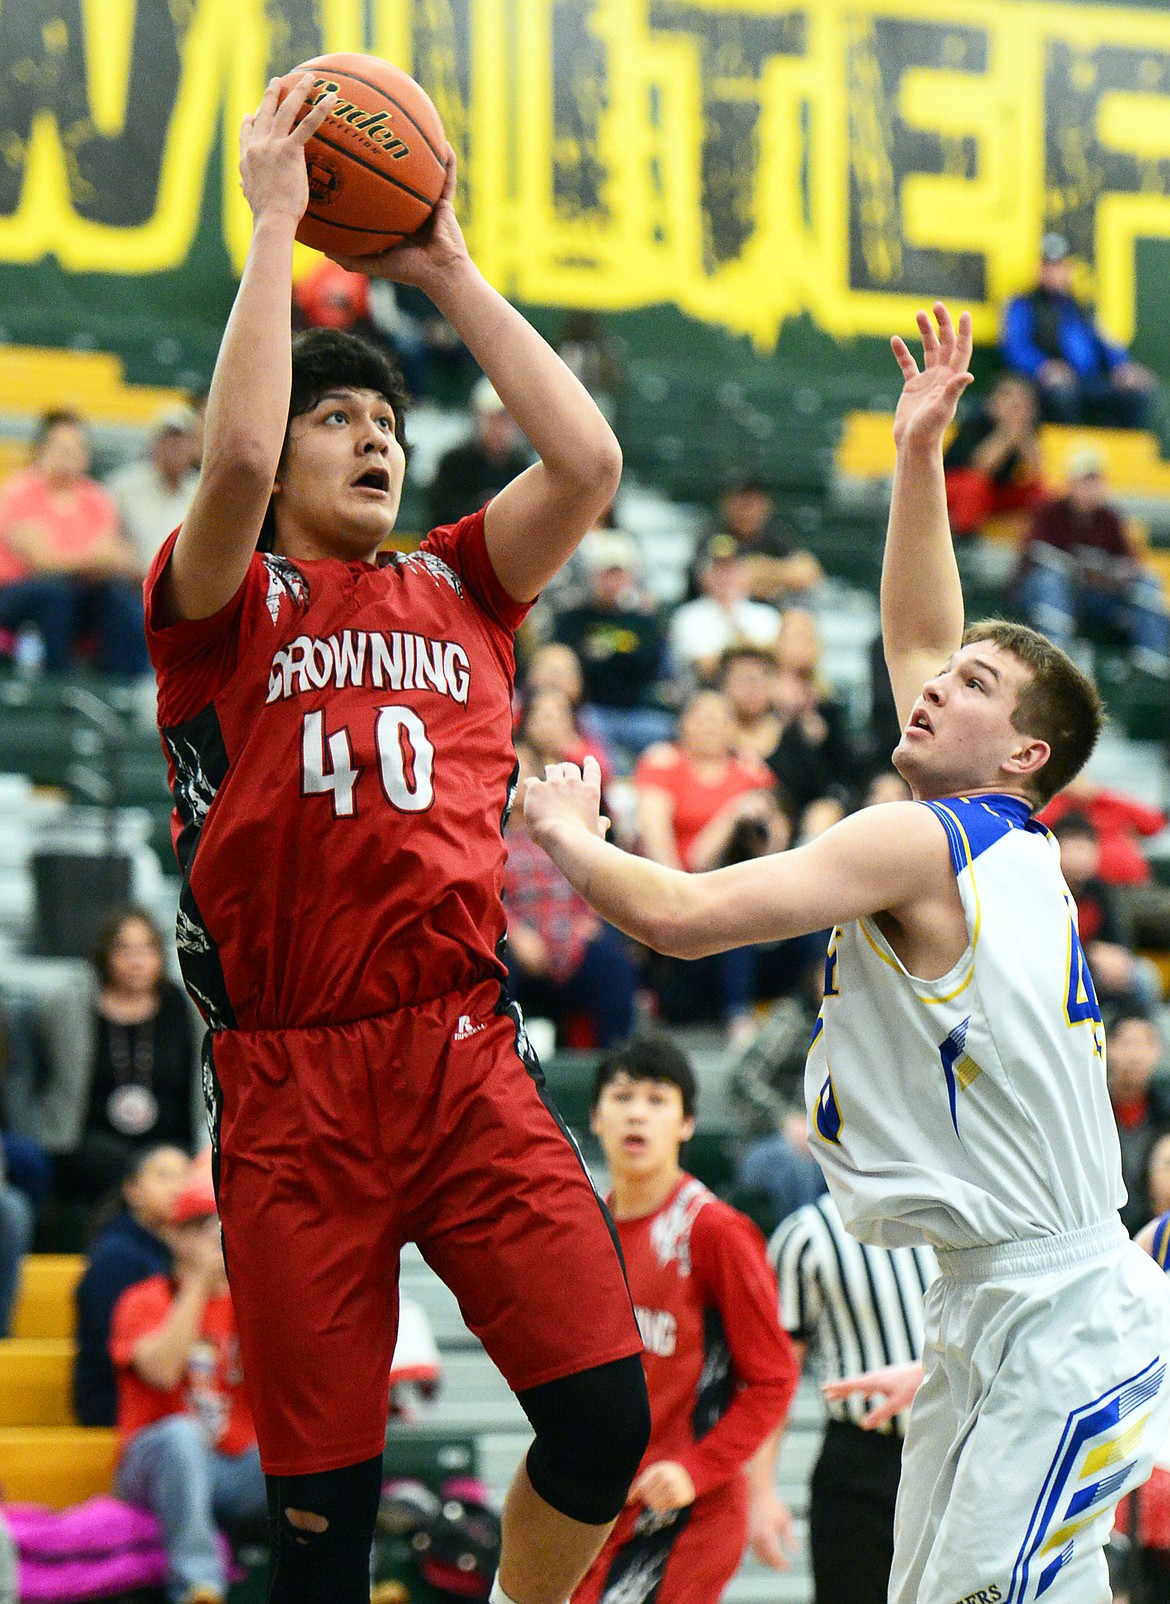 Browning's Tyree Whitcomb (40) shoots over Libby's Tim Goodman (40) at Whitefish High School on Friday. (Casey Kreider/Daily Inter Lake)